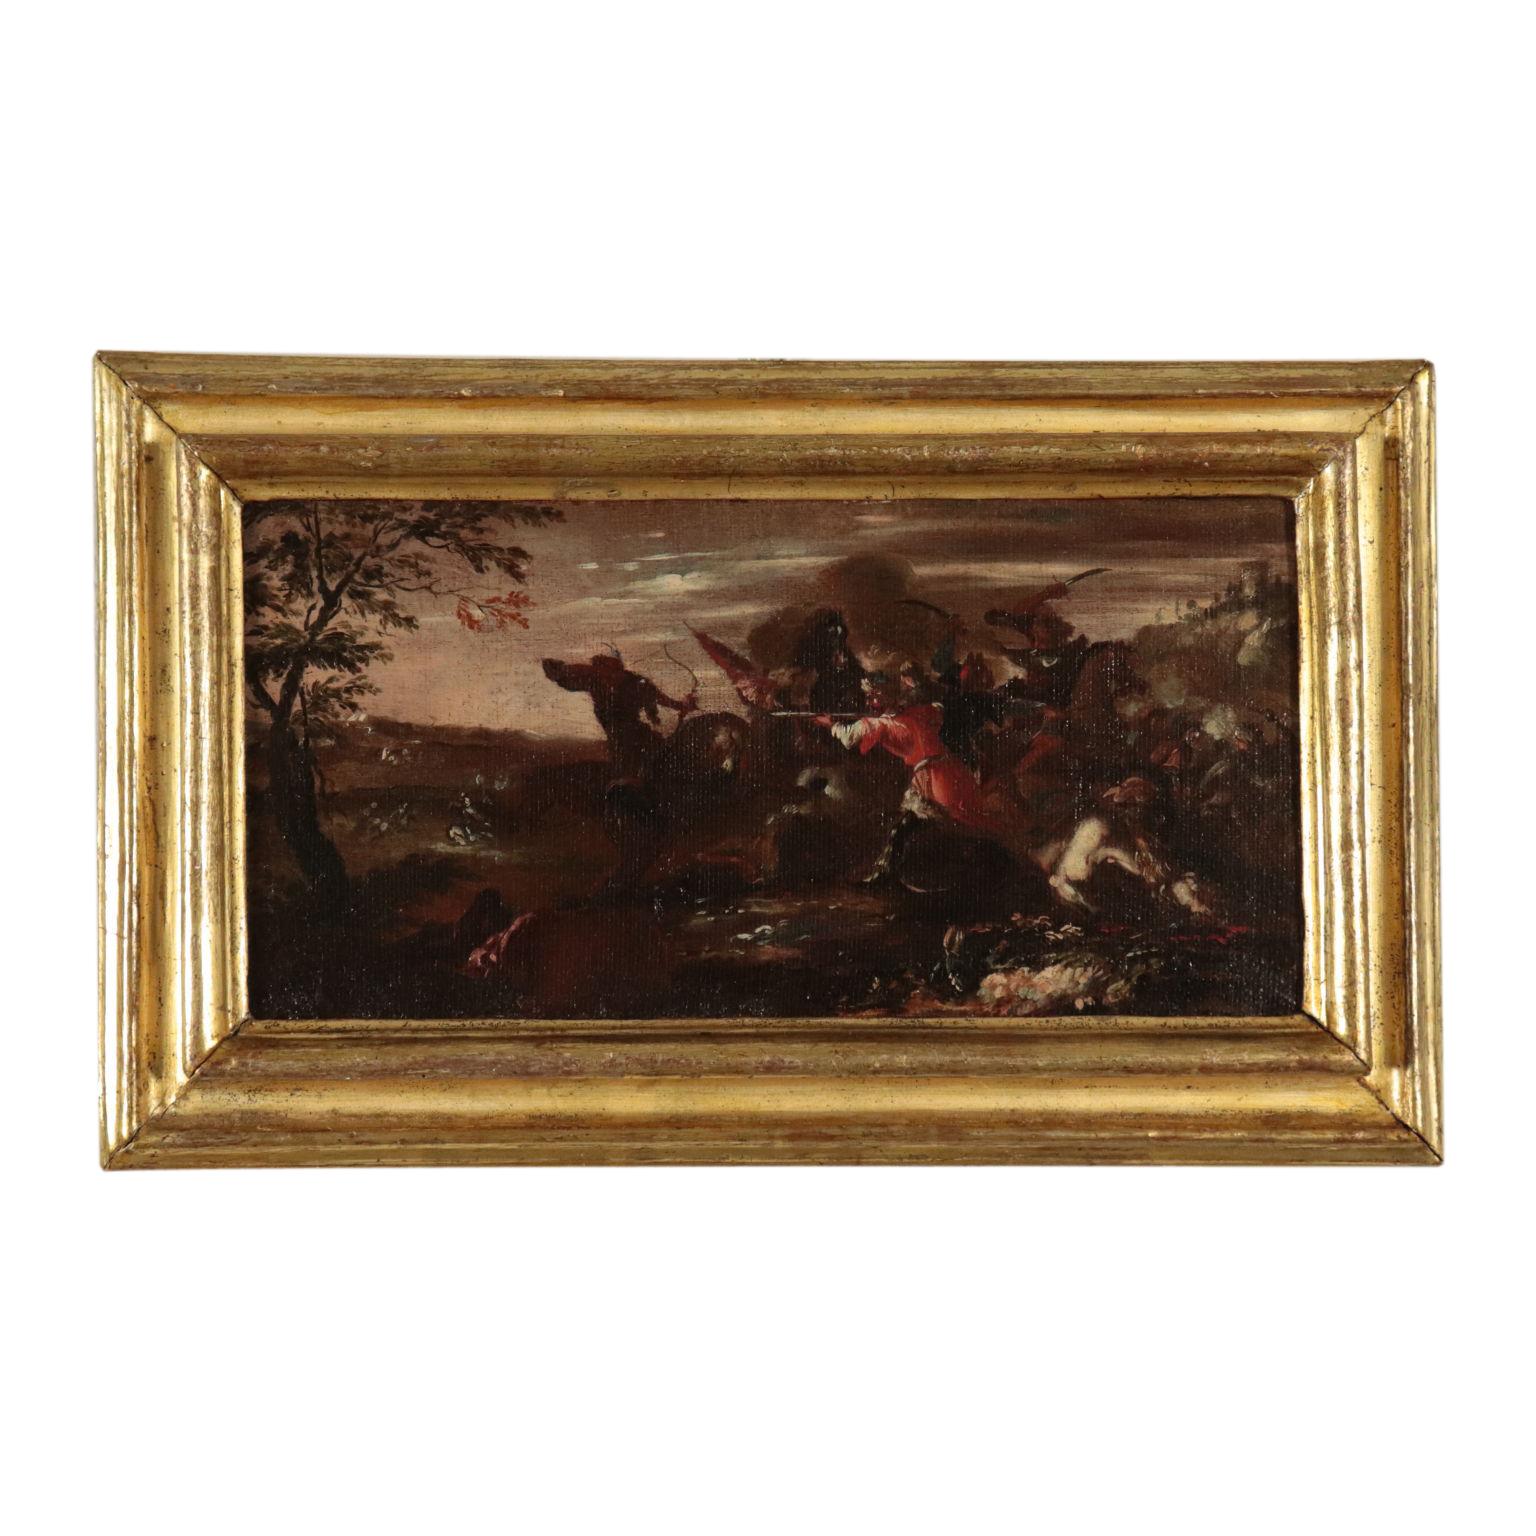 Unknown Landscape Painting - War Scene Oil Painting Late 17th Century